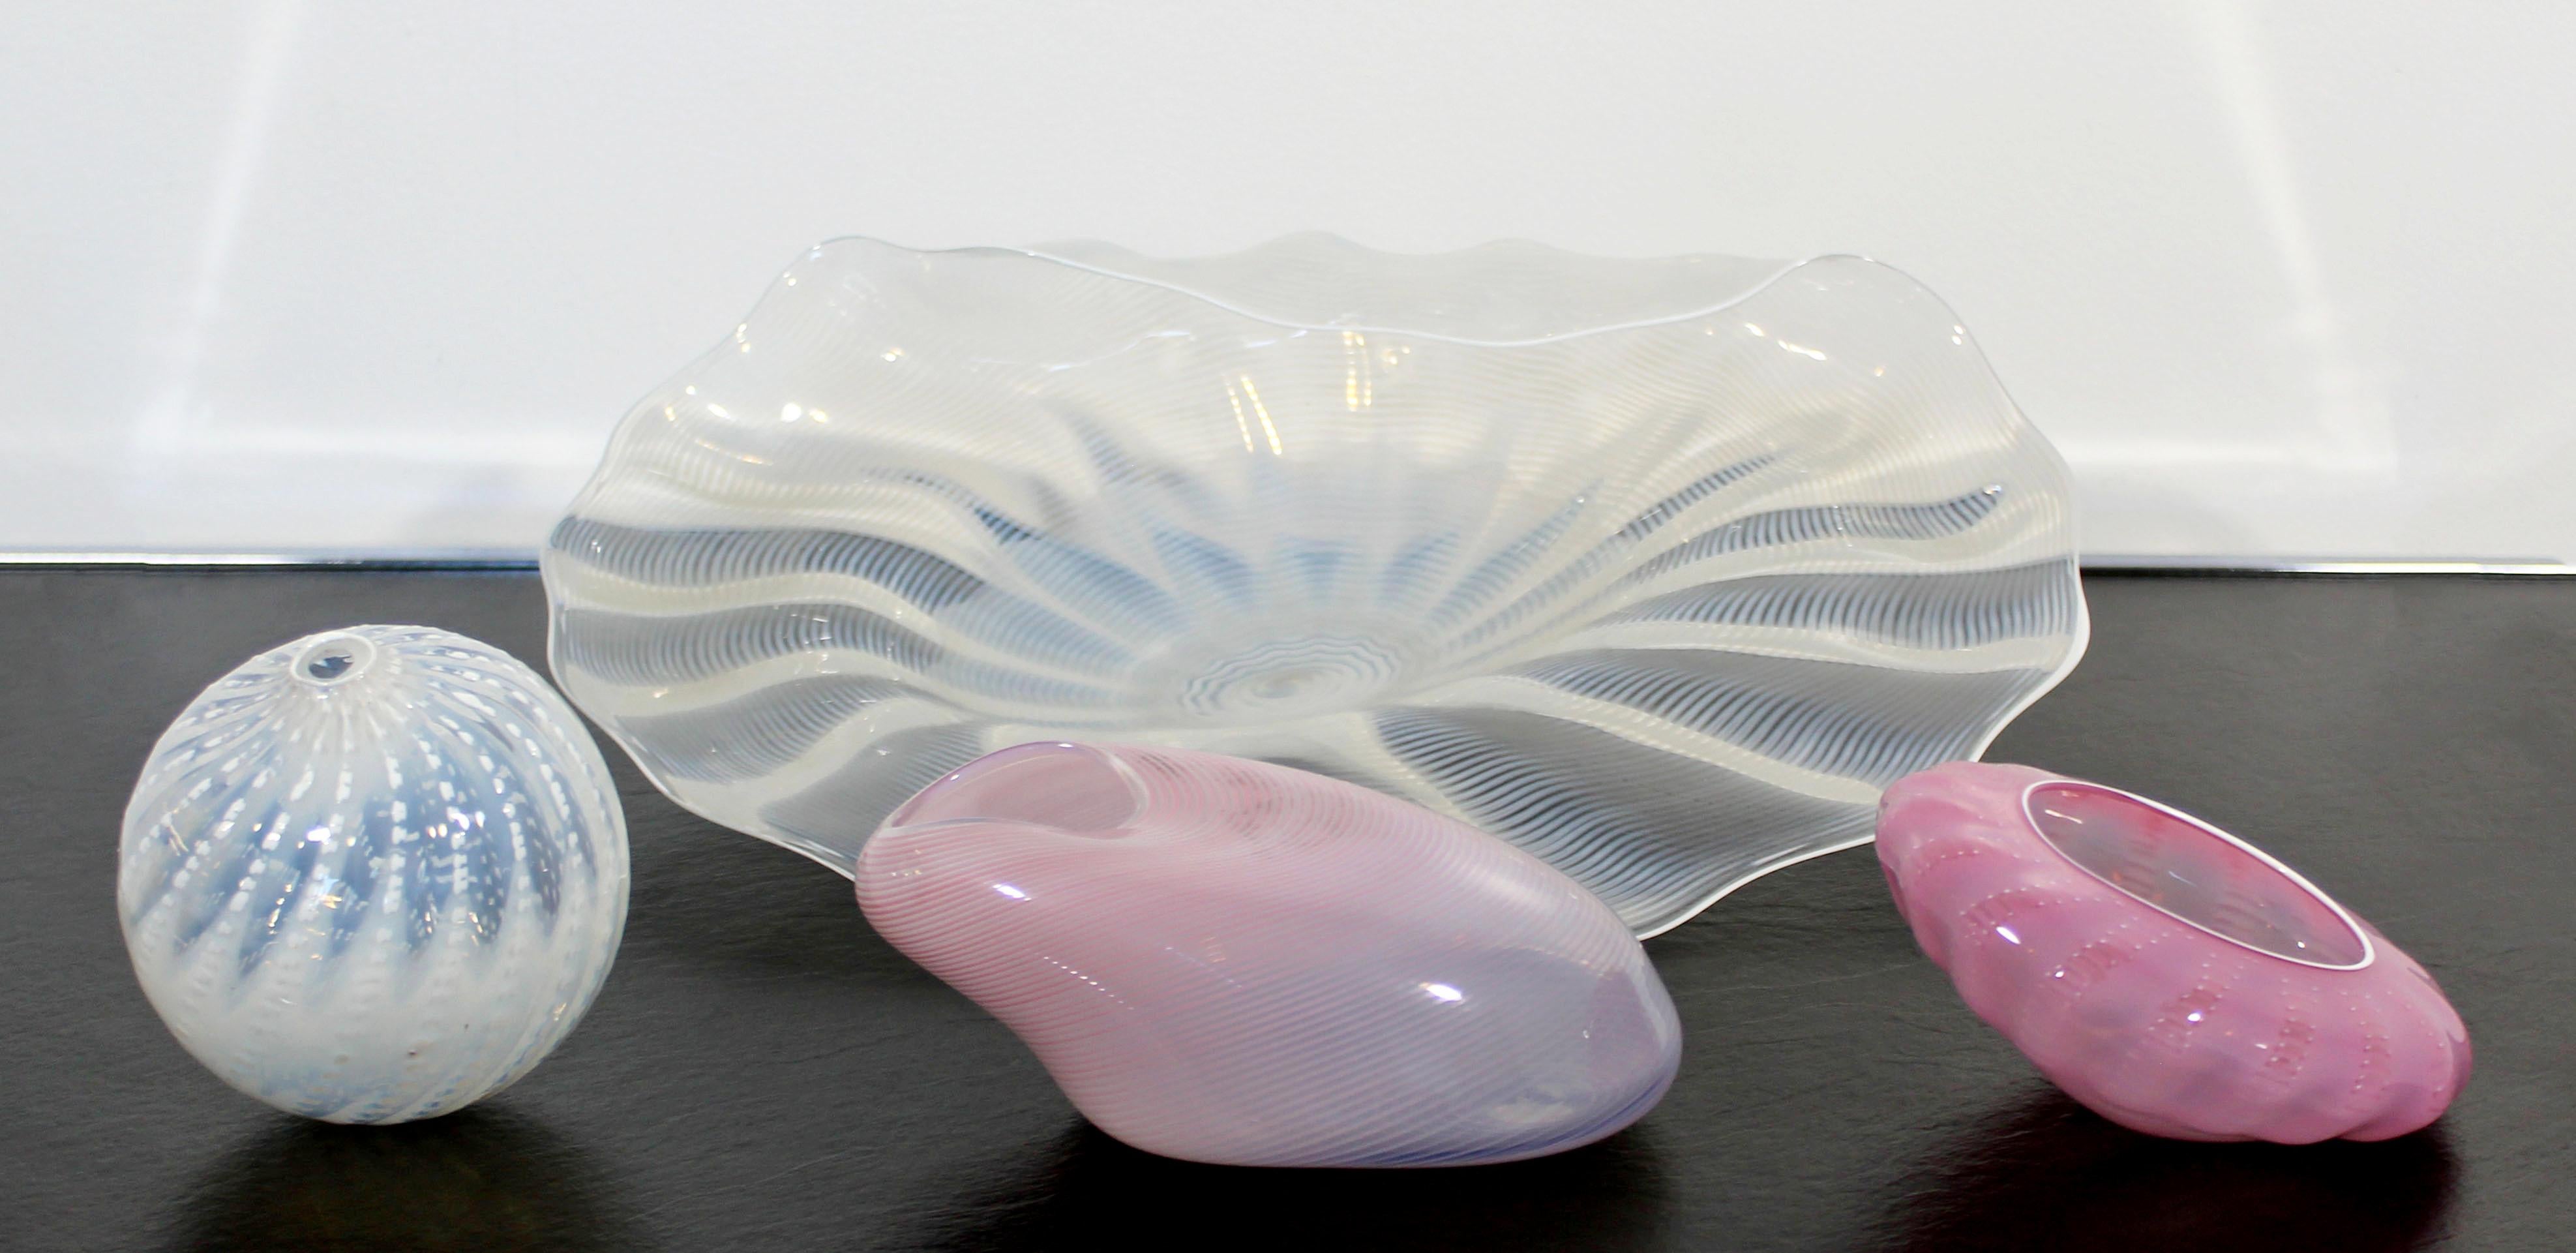 Contemporary Dale Chihuly 4-Piece Glass Sea Shell Art Table Sculpture 1990s Pink 1